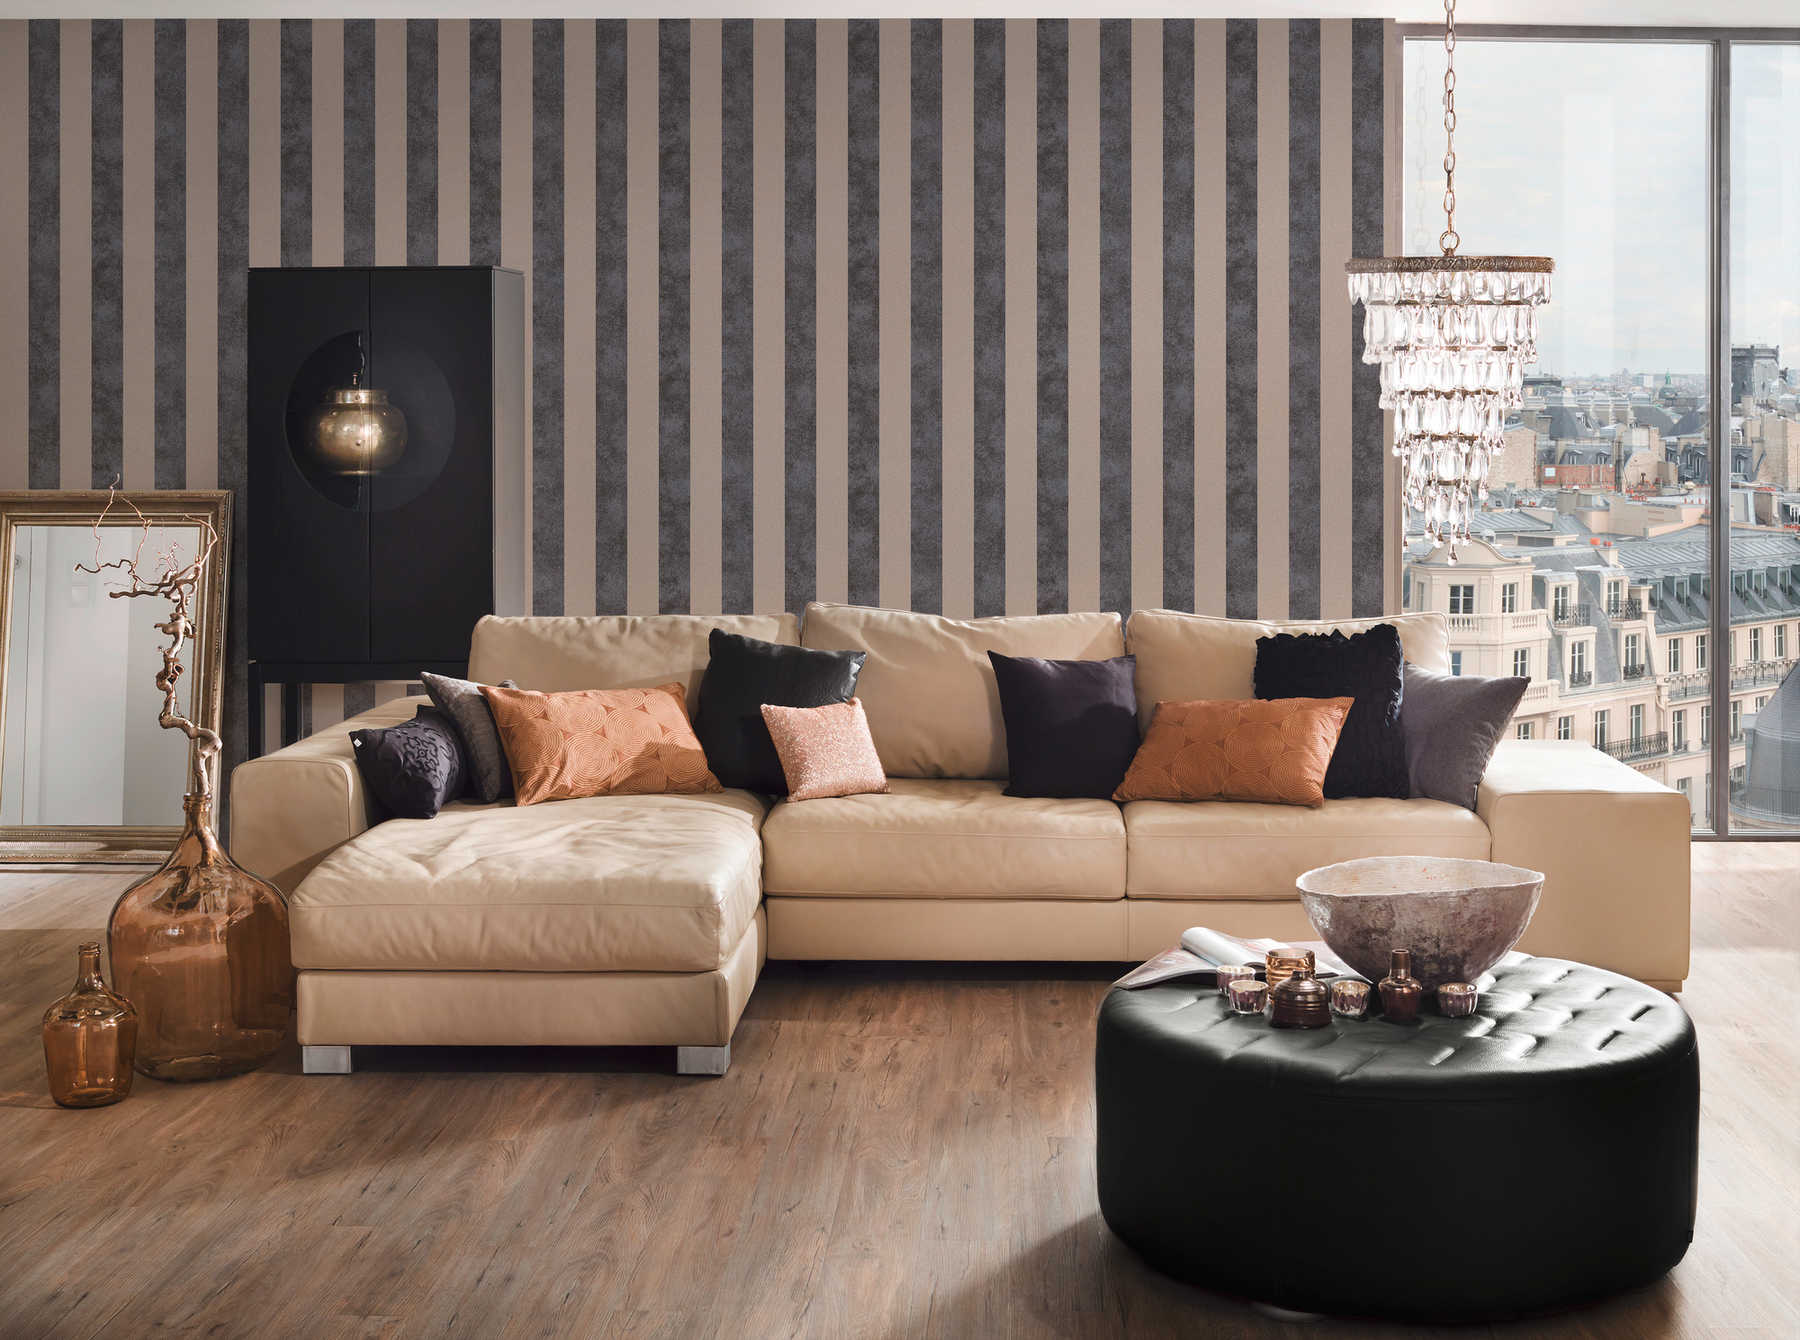             Block stripes wallpaper with colour and texture pattern - black, beige, silver
        